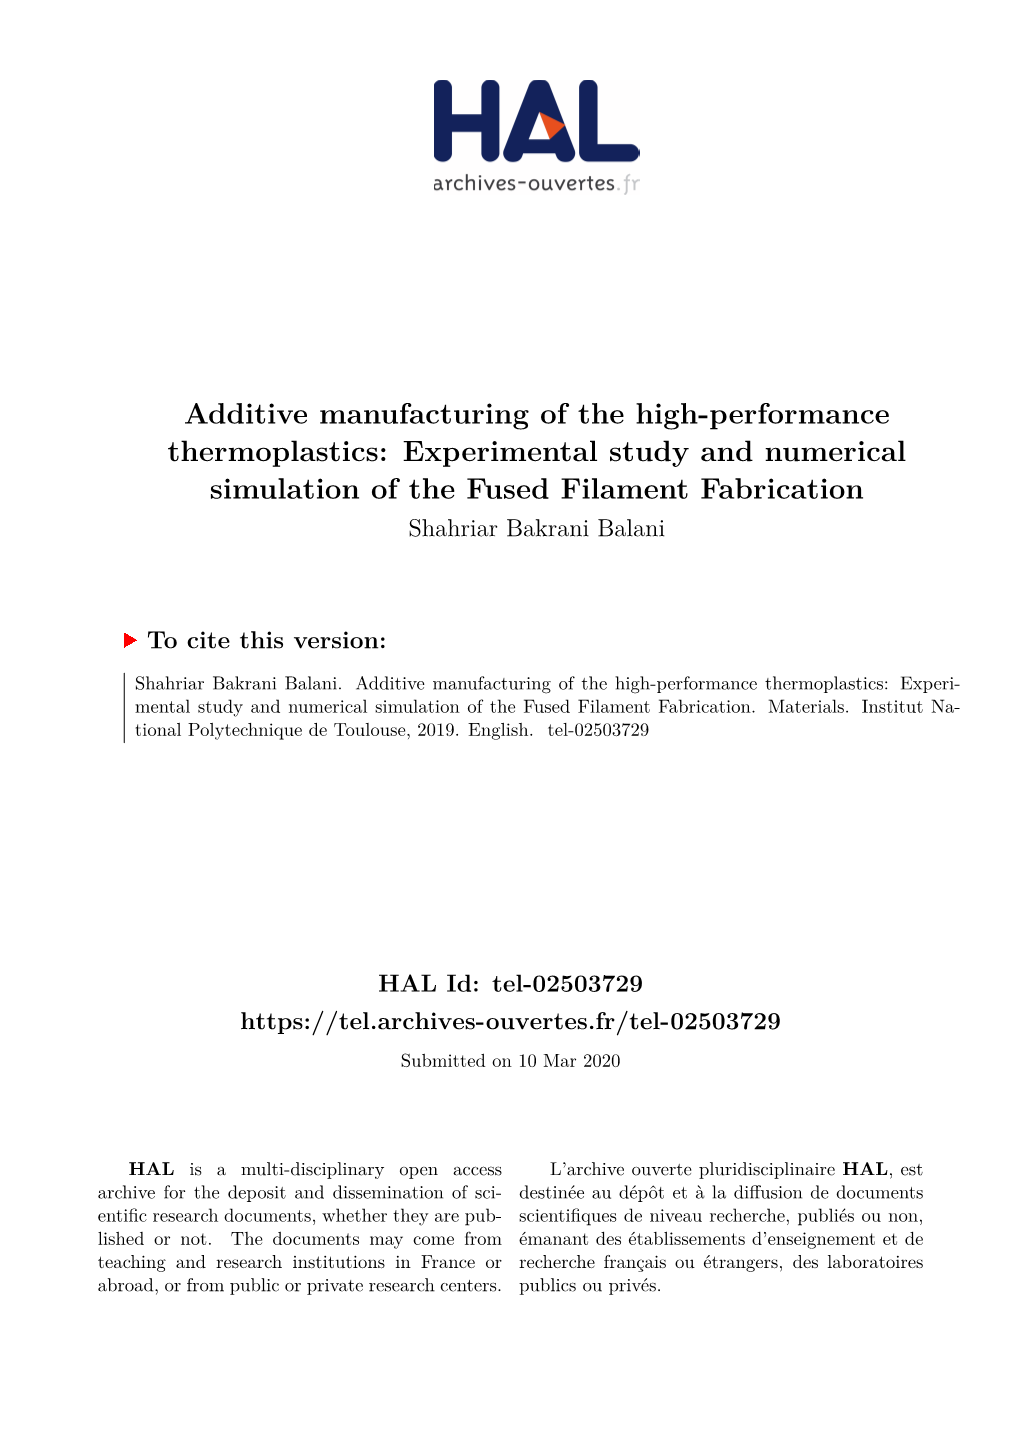 Additive Manufacturing of the High-Performance Thermoplastics: Experimental Study and Numerical Simulation of the Fused Filament Fabrication Shahriar Bakrani Balani